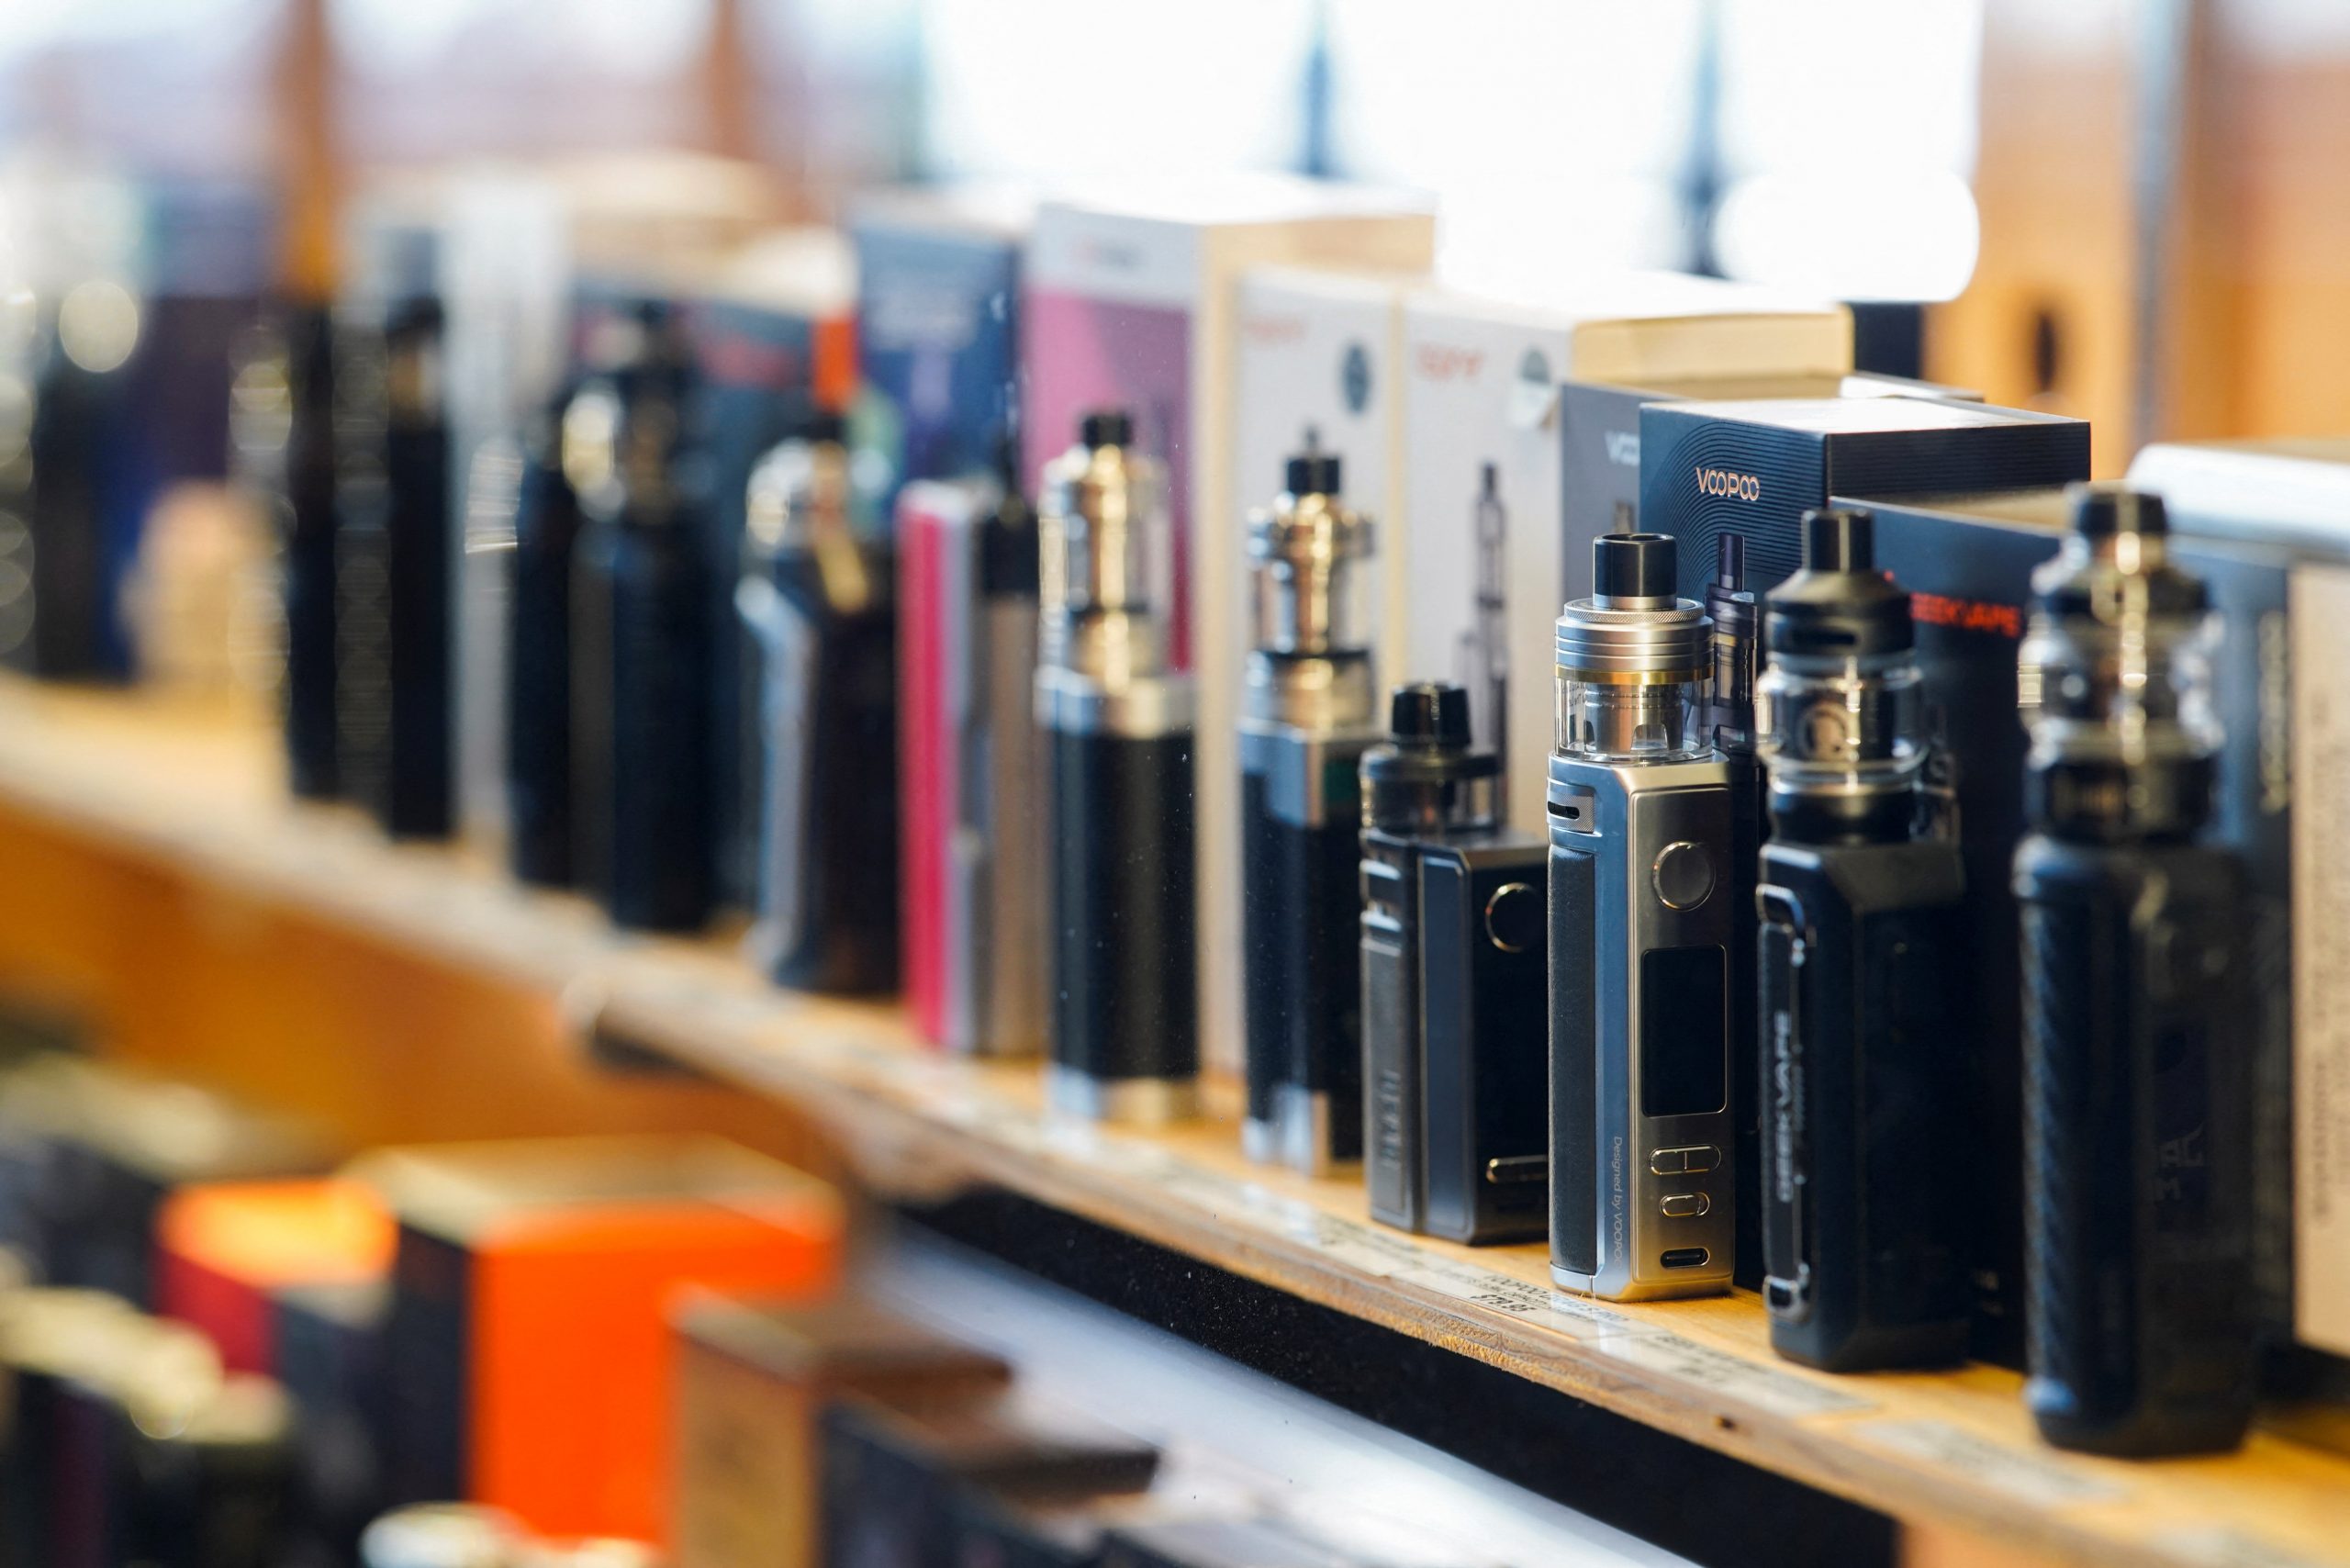 Consumer body lambasts WHO’s ‘misguided’ claims on vaping